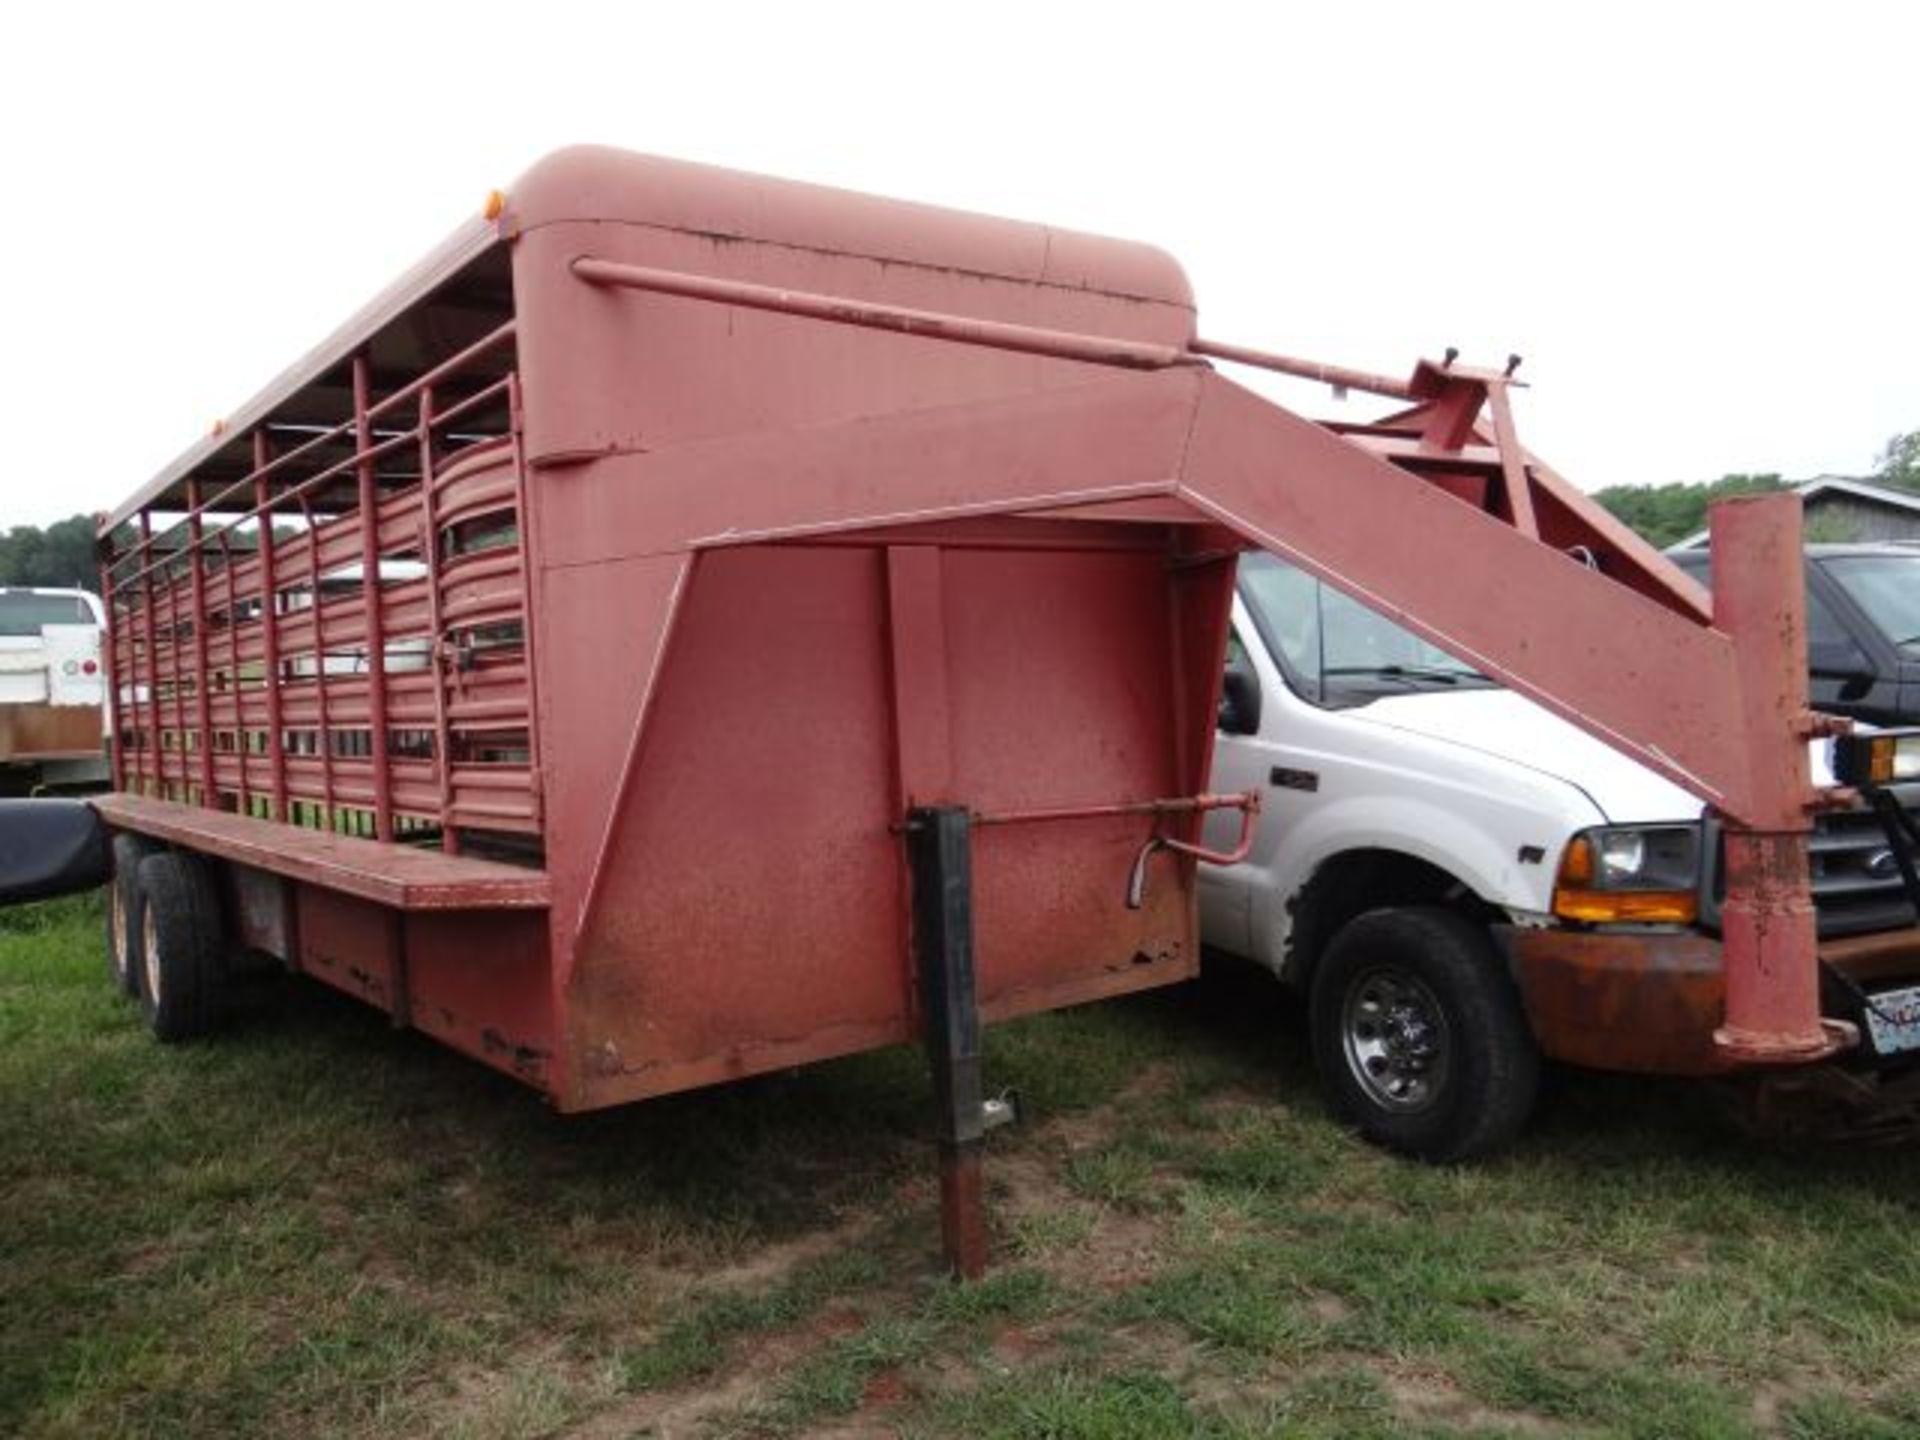 1991 WW Livestock Trailer 20', 7' Wide, Gooseneck, Center Gate, Title in the Office - Image 2 of 3